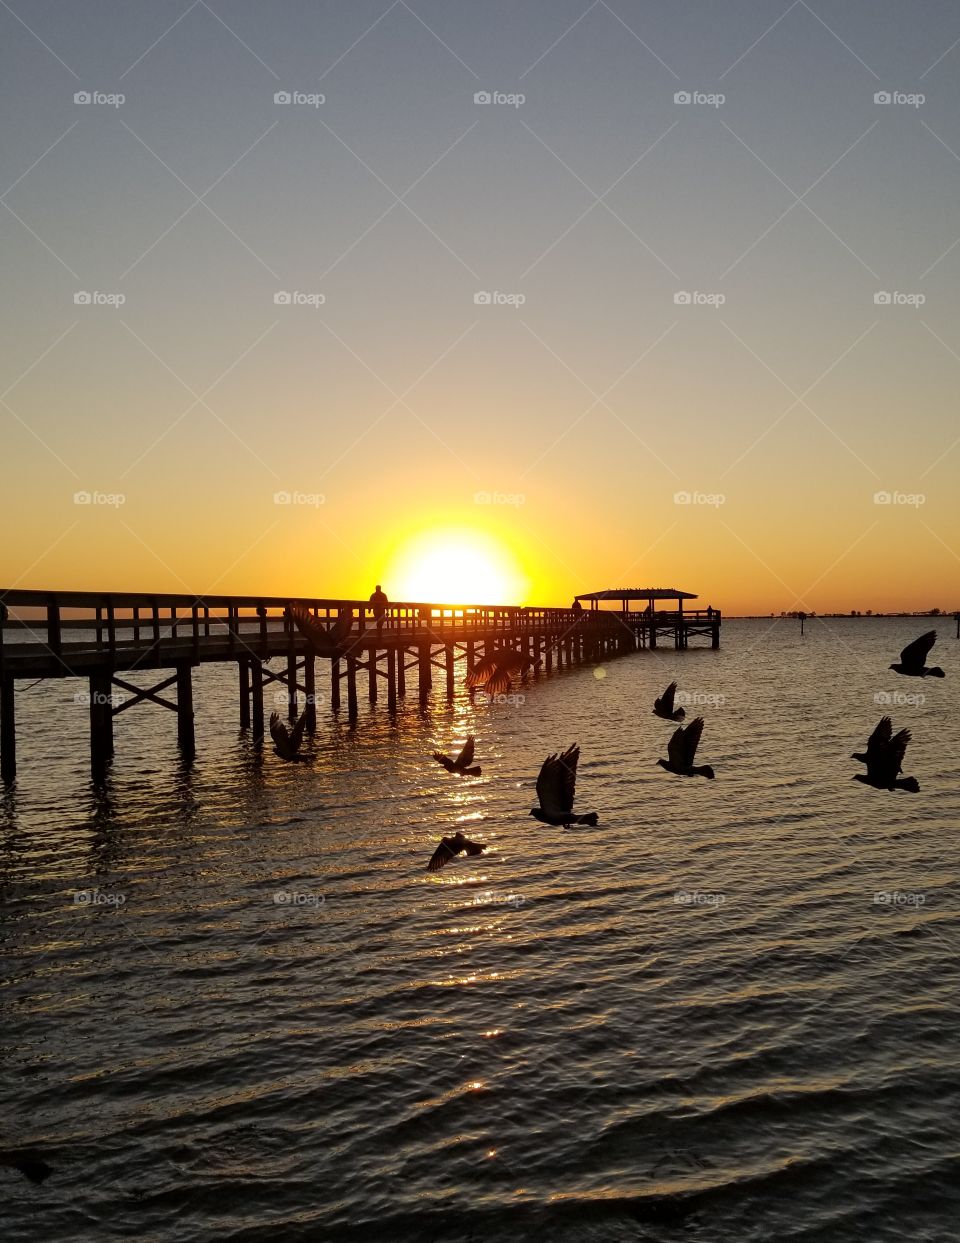 A flock of birds flying over the pier at sunrise